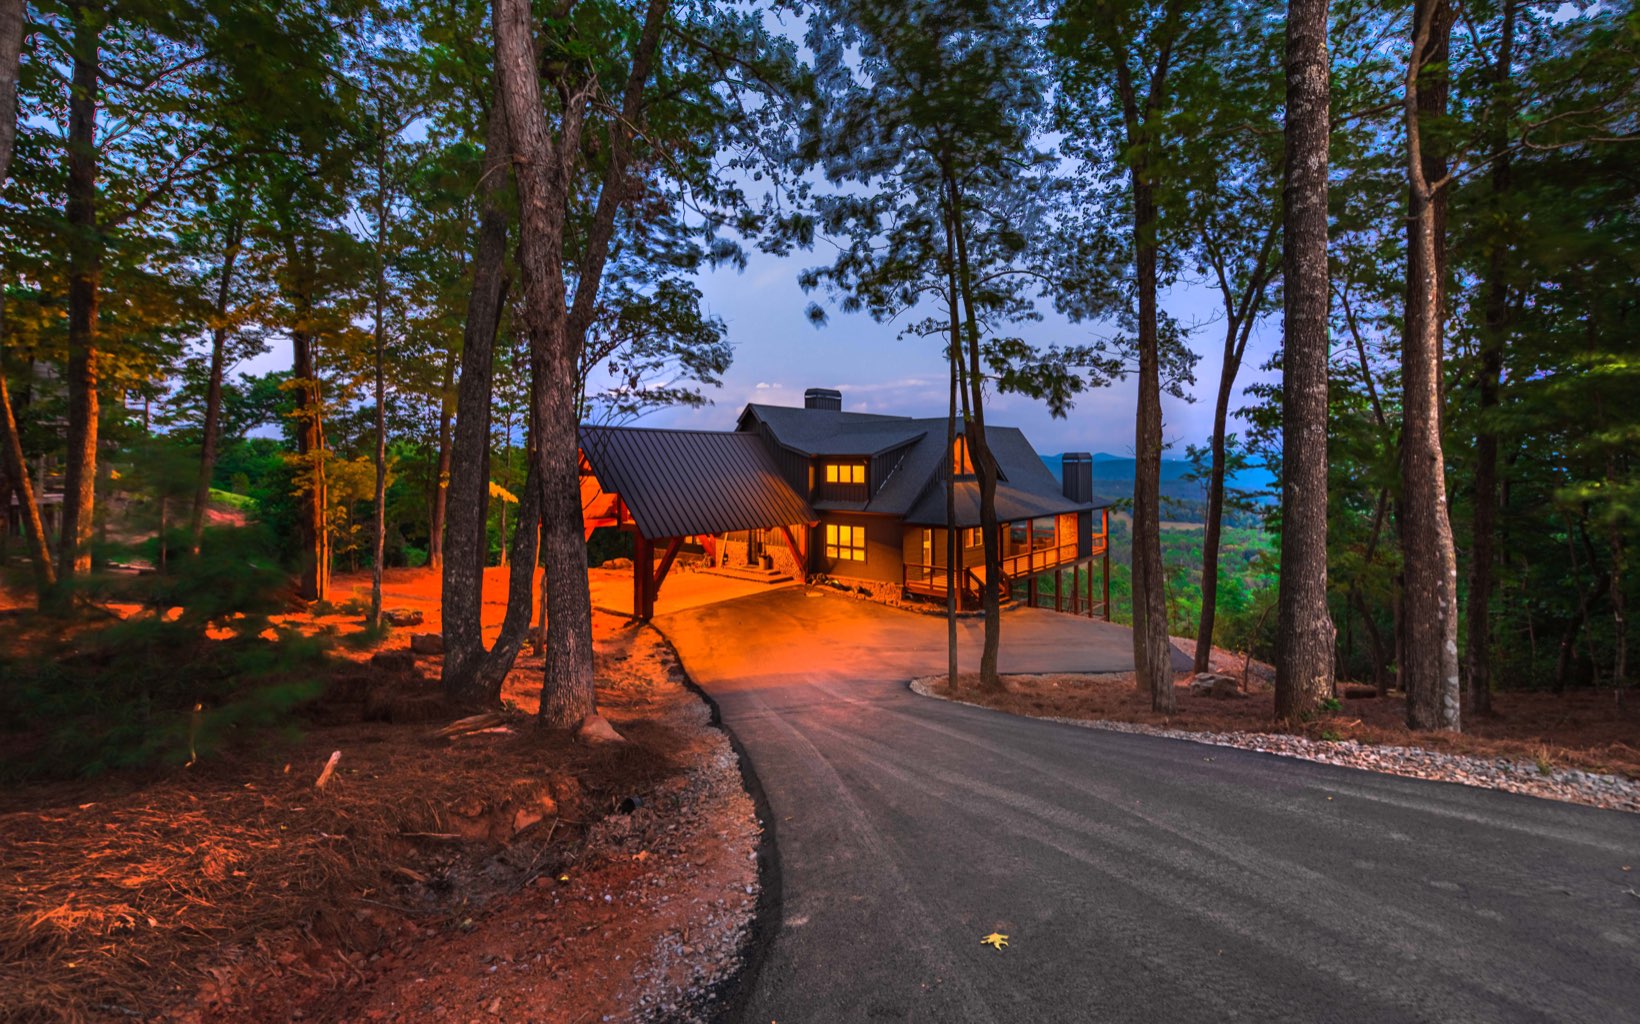 Exquisite mountain home w/ best views in North GA! Meander down private driveway & be blown away by awe inspiring (2 car) porte-cochere w/ 10 foot cedar beams & massive two tiered iron chandelier. Step into impressive iron & glass door & WOW...sensory overload!! The most amazing long range view from every vantage point. Take in the 16 foot ceilings, hand forged iron stair railings, gorgeous stone fireplace (wood burning), & sophisticated chandeliers. The wide open floor plan is very large scale & can accommodate so many guests. The kitchen is a dream; offering lots of cabinet space, Viking appliances, wine cooler, 10 foot party island, gorgeous marble & quartz counters. Just off kitchen is side entrance/mud room which opens to a huge pantry room. Sliders off of the kitchen lead you to a massive outdoor deck w/ fireplace, a hand crafted dining table that seats 12, & the best view in town! The enormous master suite w/ private study (or yoga) room is on main level; master bath is over the top w/ large walk in shower (complete with a view), soaking tub, double vanities & huge closet. Same size master suite can be found on terrace level, along w/ another guest bed/bath. Huge terrace den, bar & tucked away wine & whiskey rooms! Huge upper bunk or rec room. Home just completed staging today: available to show Saturday. Fully FURNISHED. First showings this Saturday July 2nd.